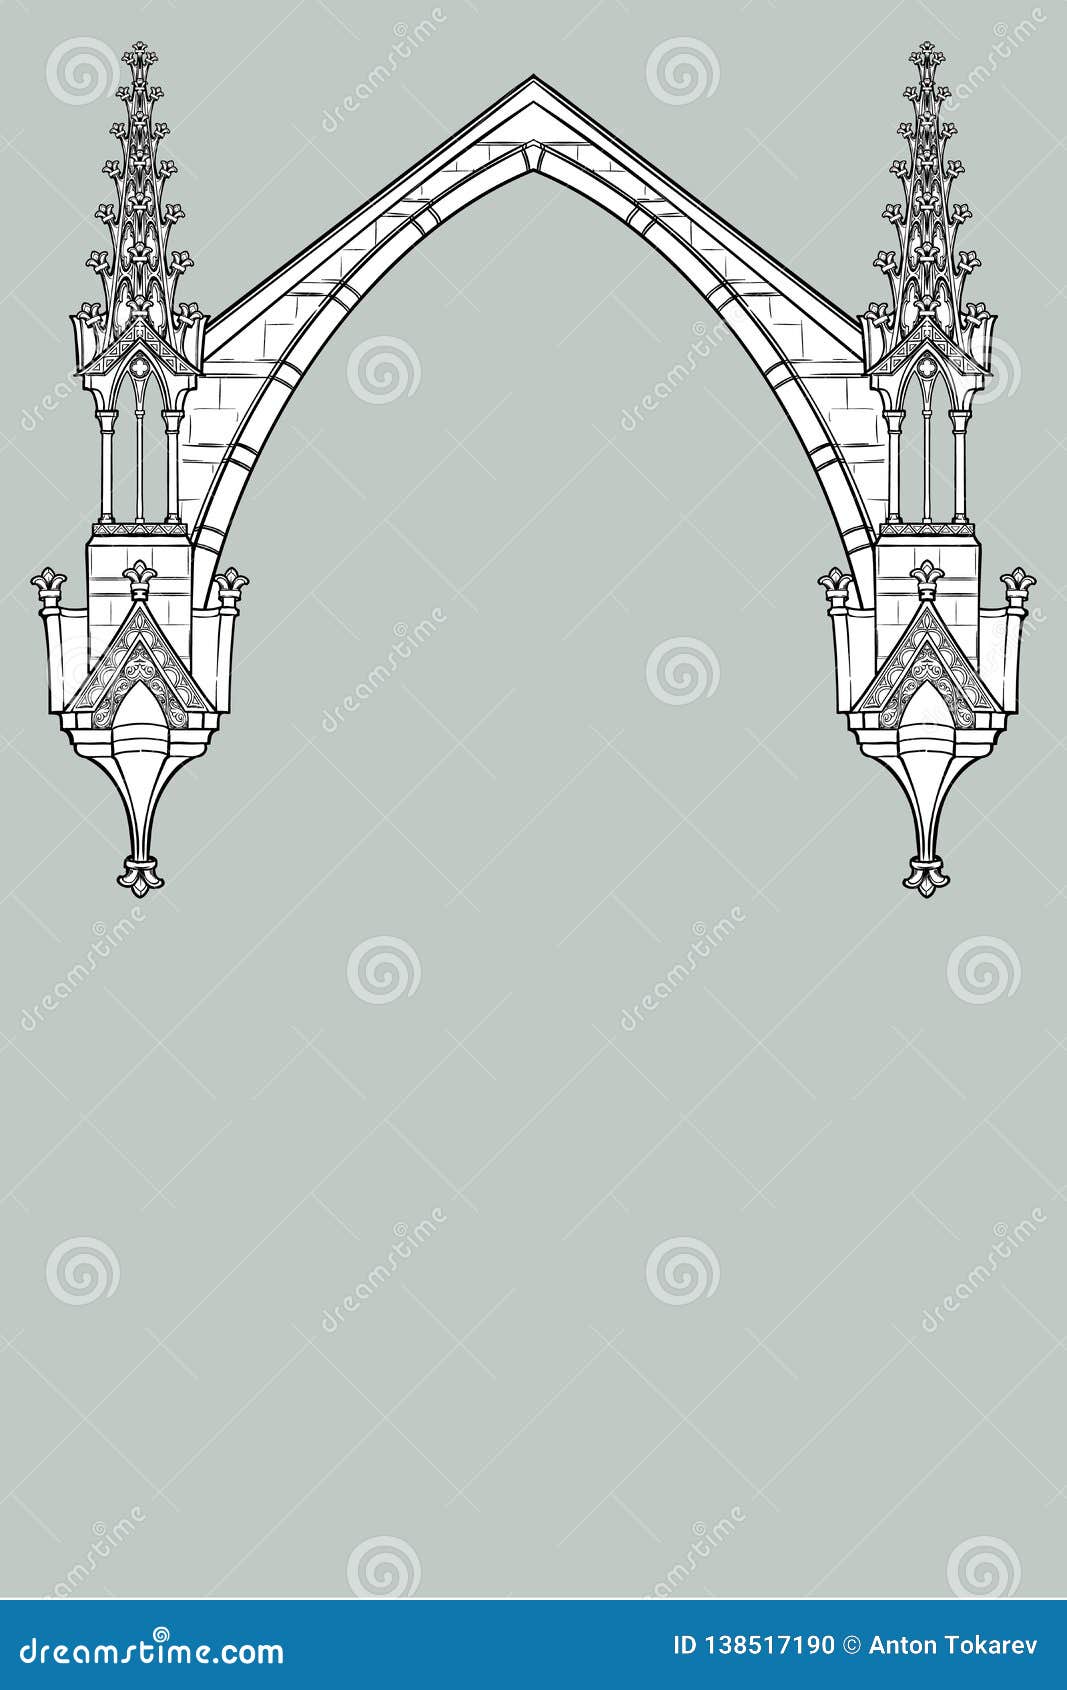 Early English window contain specimens of Early English windows on their pointed  arches and vaulted roofs vintage line drawing or engraving illustration   Stock Image  Everypixel